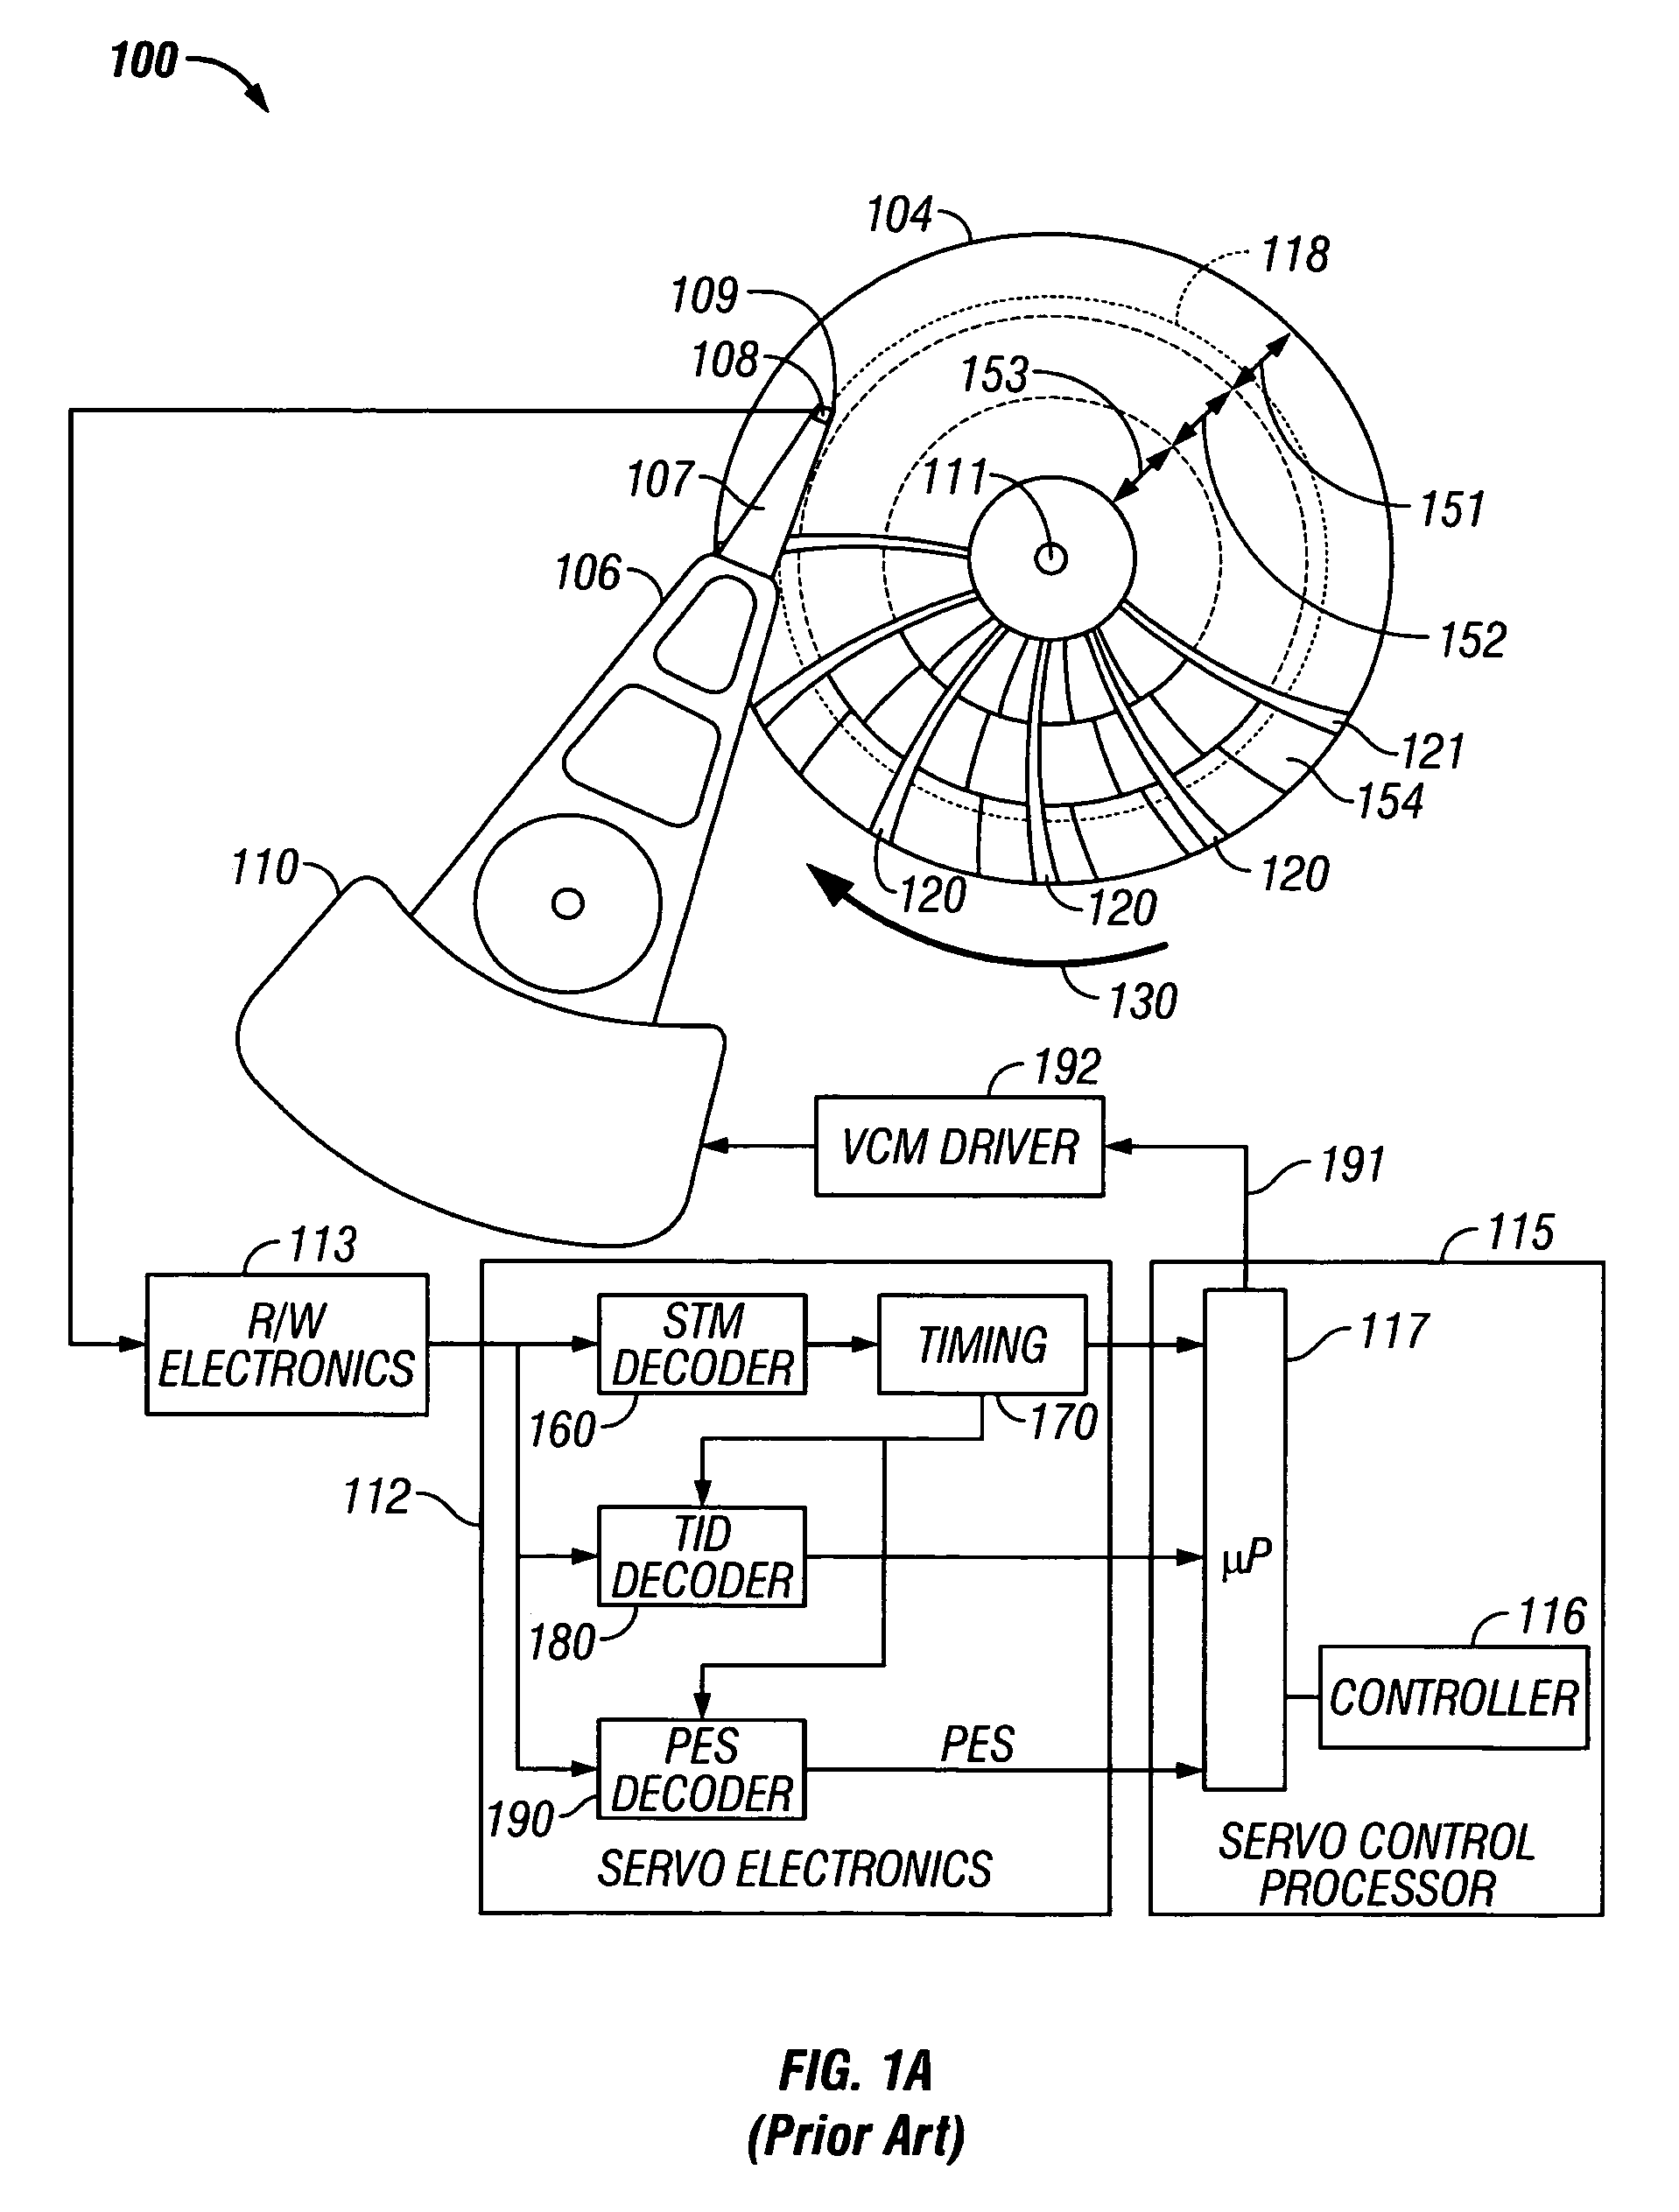 Dual-stage actuator disk drive with method for secondary-actuator failure detection and recovery while track-following